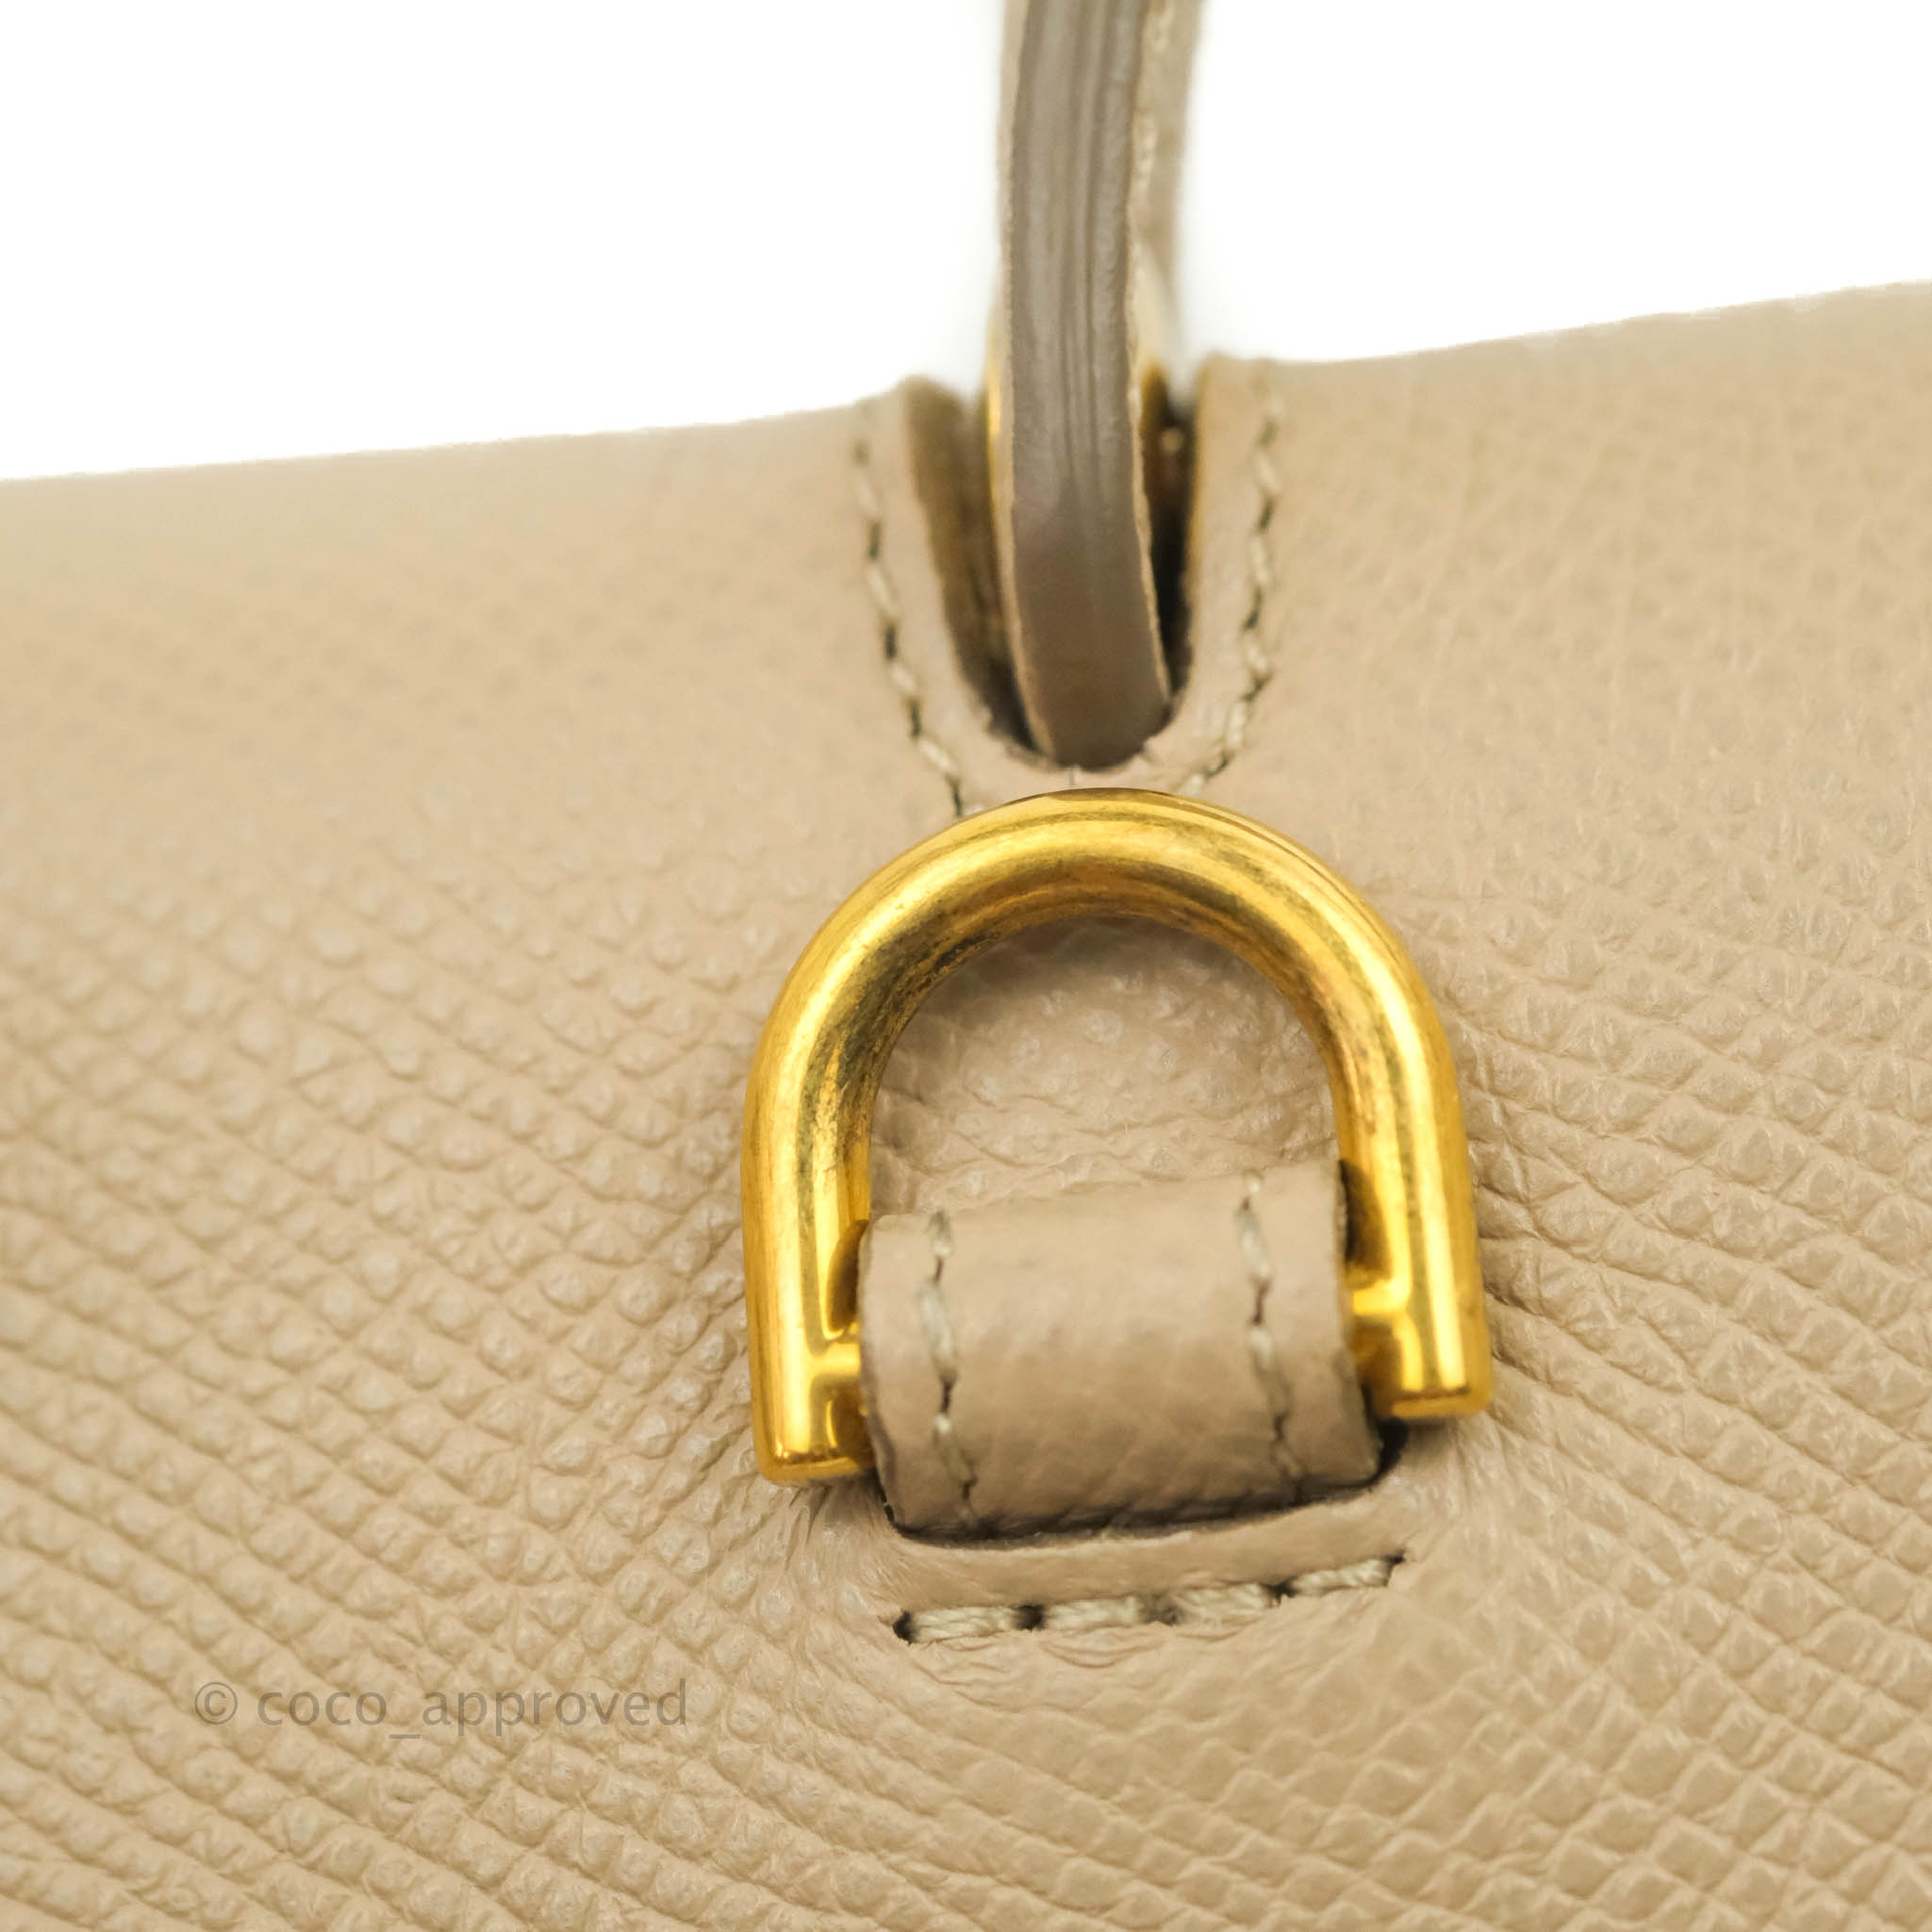 MICRO BELT BAG IN GRAINED CALFSKIN - LIGHT TAUPE